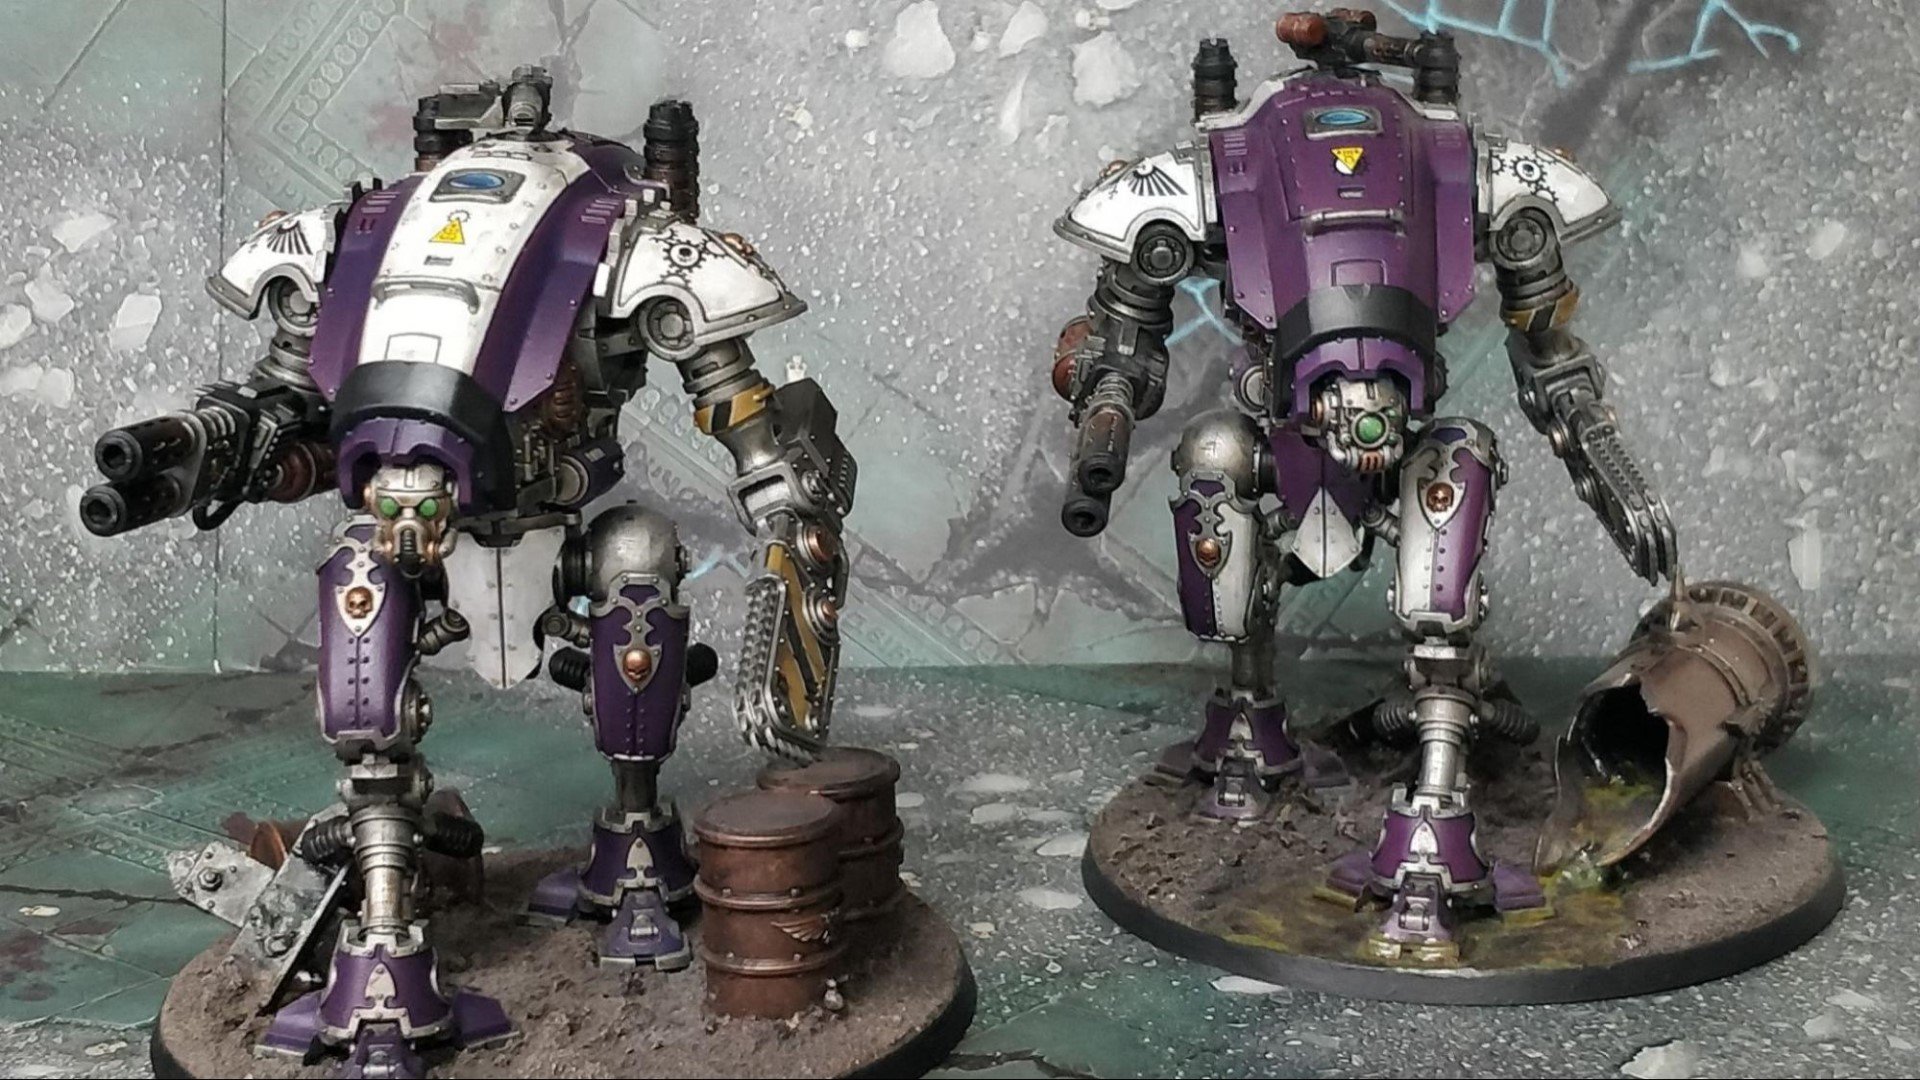 Warhammer 40k Imperial Knights army guide - Photo provided to the author by Instagram user @Pratheos showing Imperial Knight Armigers in a purple and white colour scheme